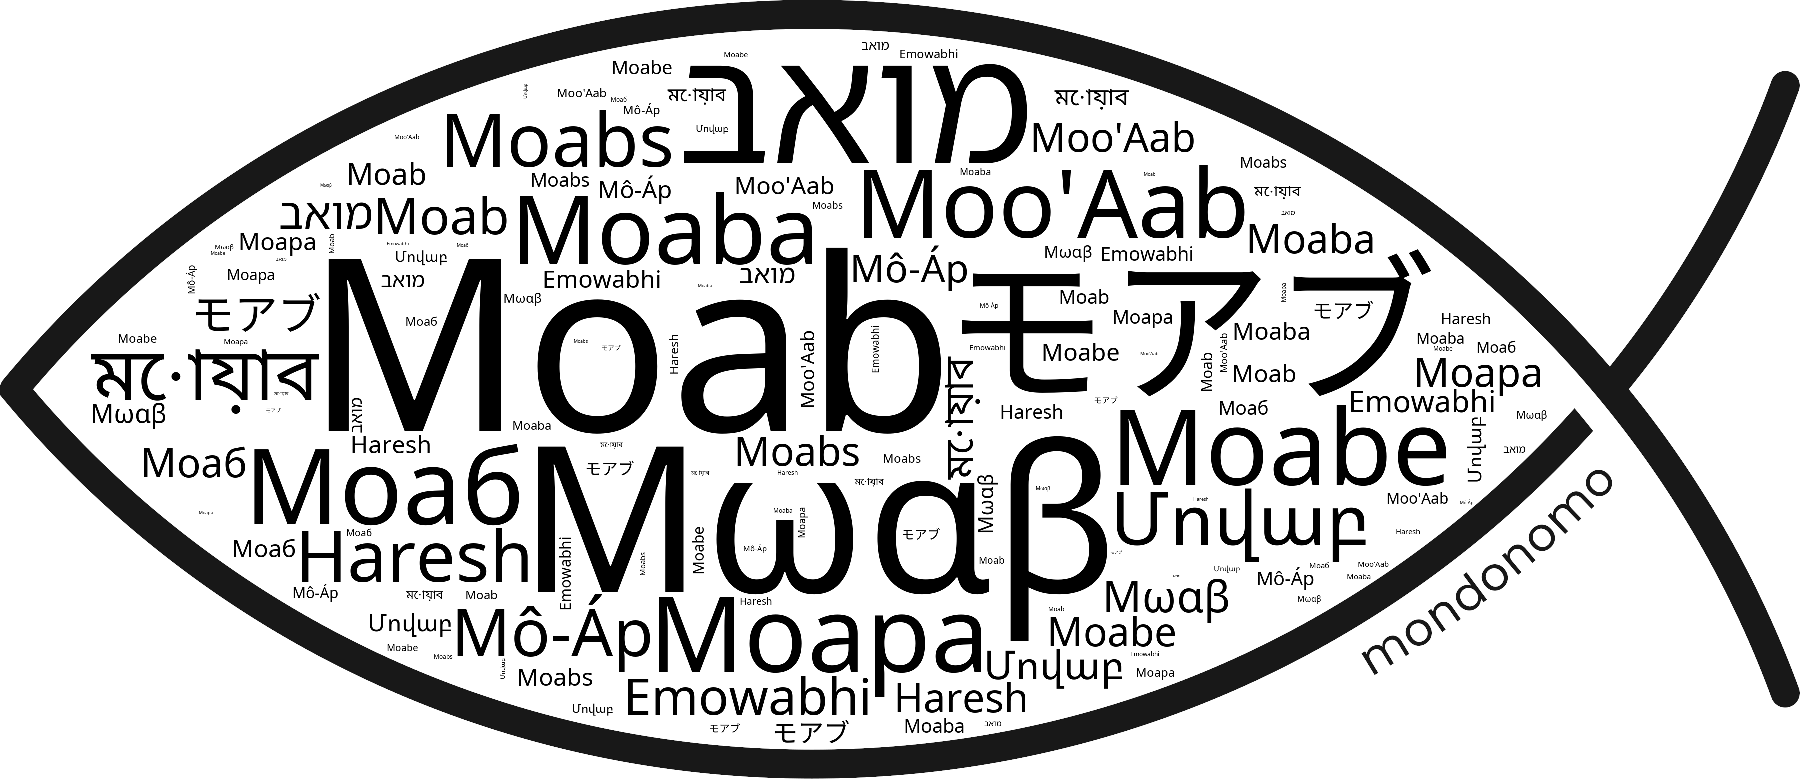 Name Moab in the world's Bibles